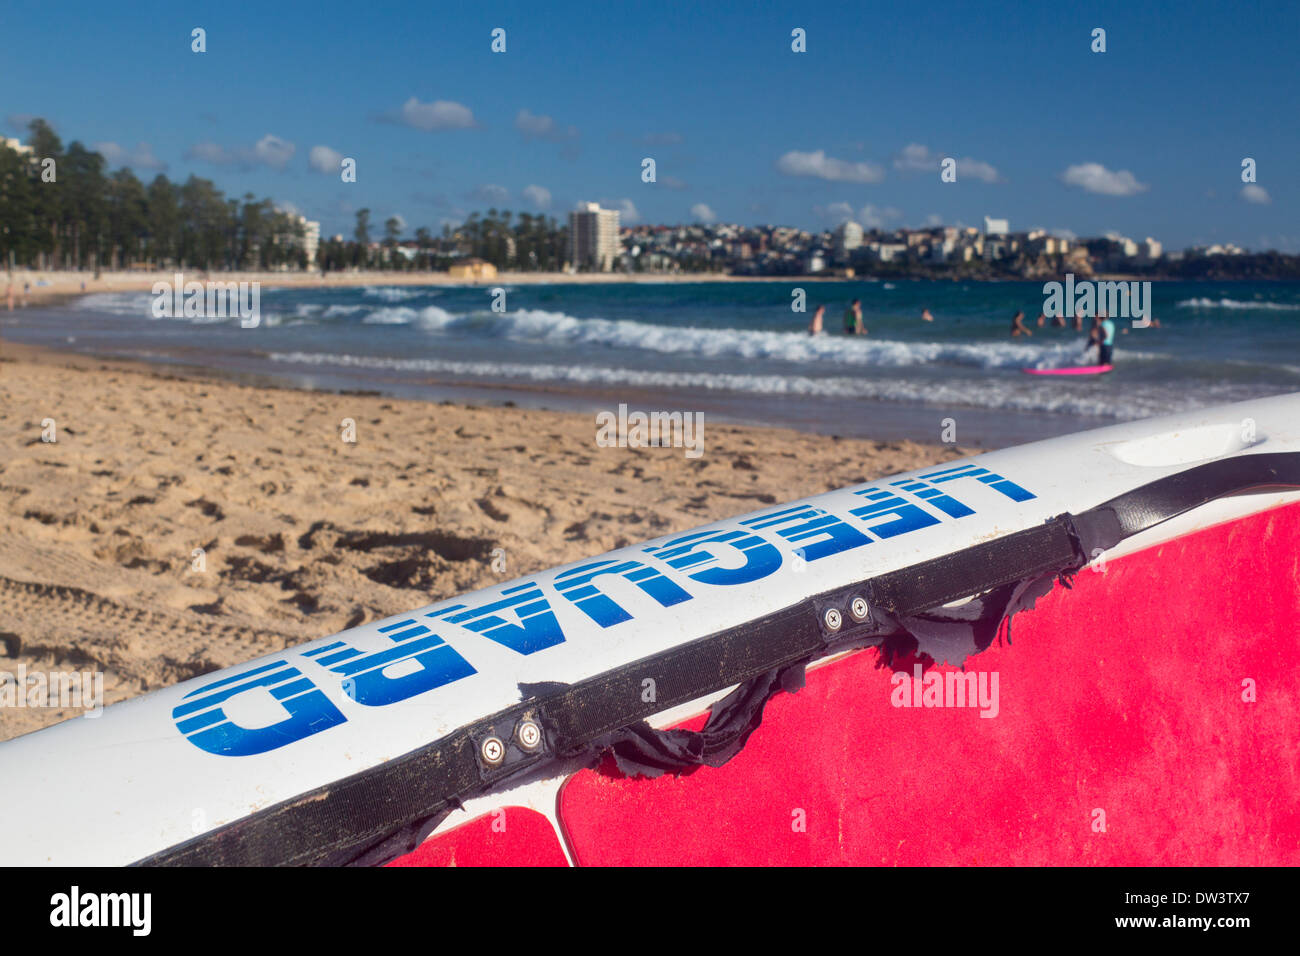 Manly North Steyne Beach with lifeguard surfboard in foreground Northern Beaches Sydney New South Wales NSW Australia Stock Photo